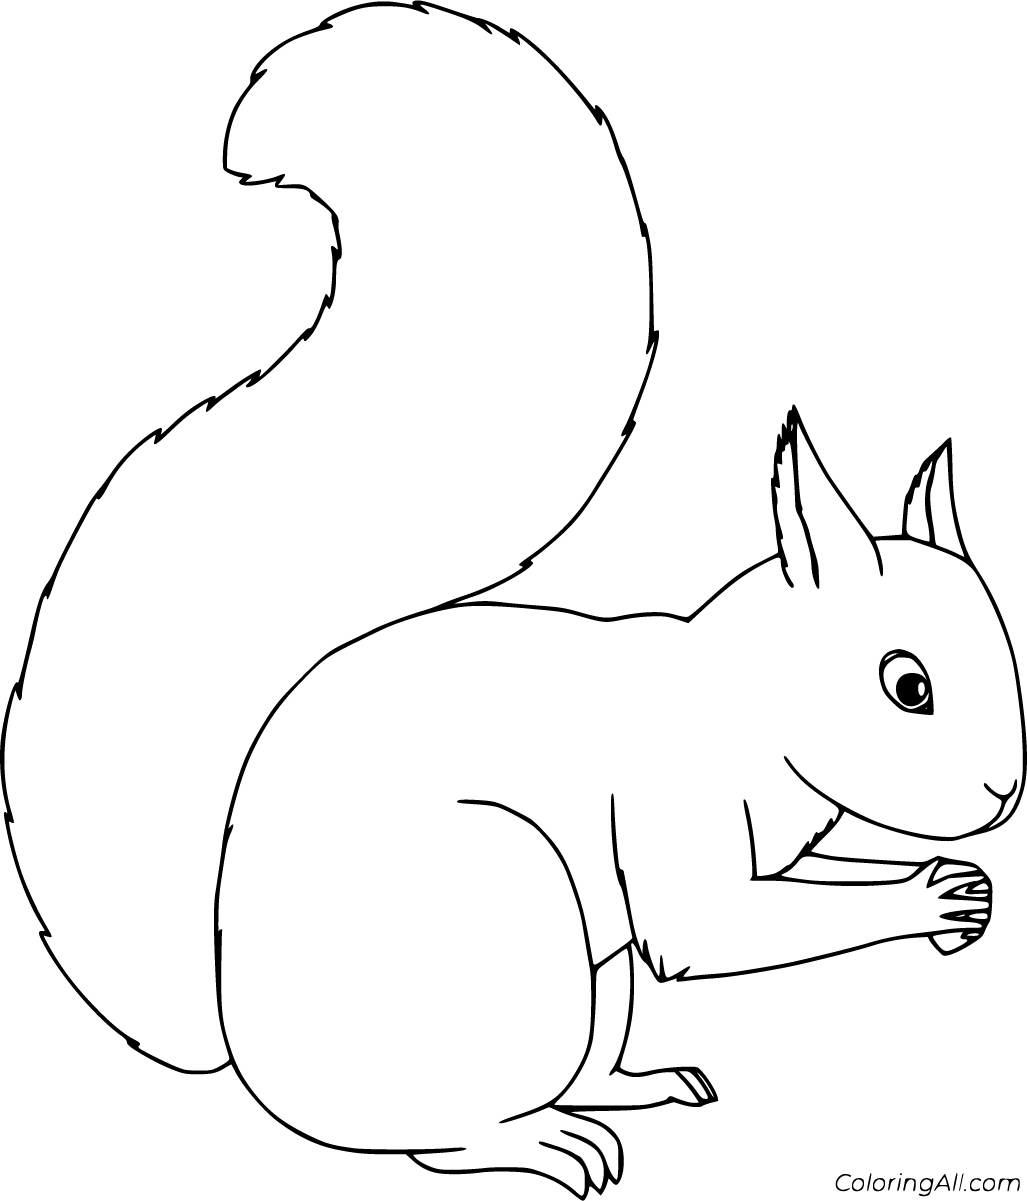 Squirrel Drawing Stock Photos and Images - 123RF